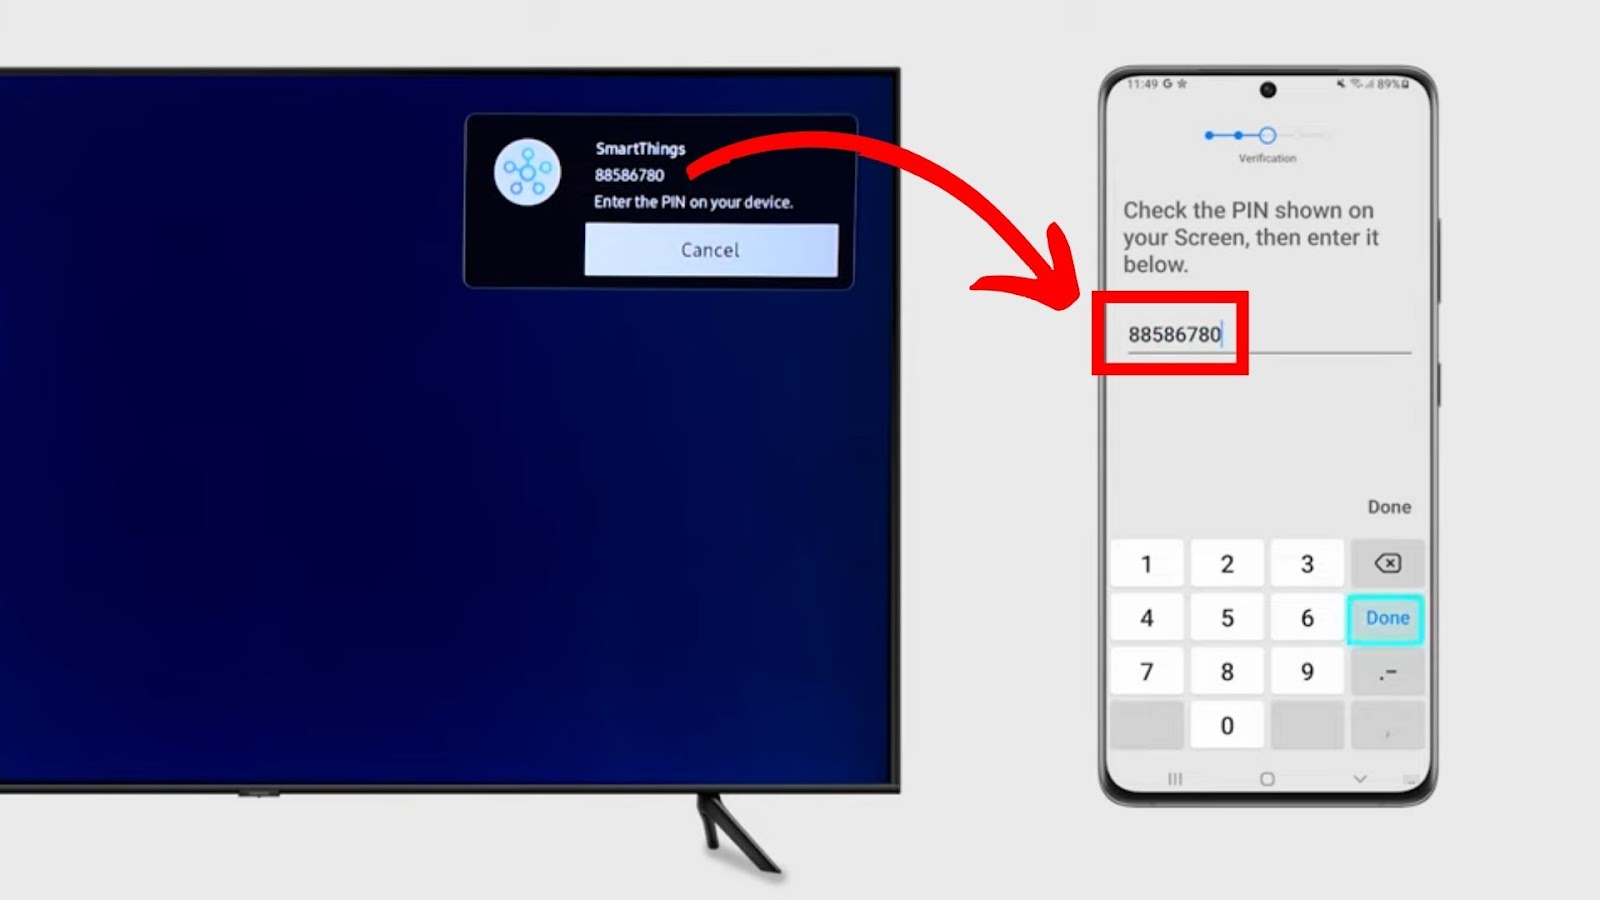 Connect Your Samsung TV to SmartThings - Enter PIN